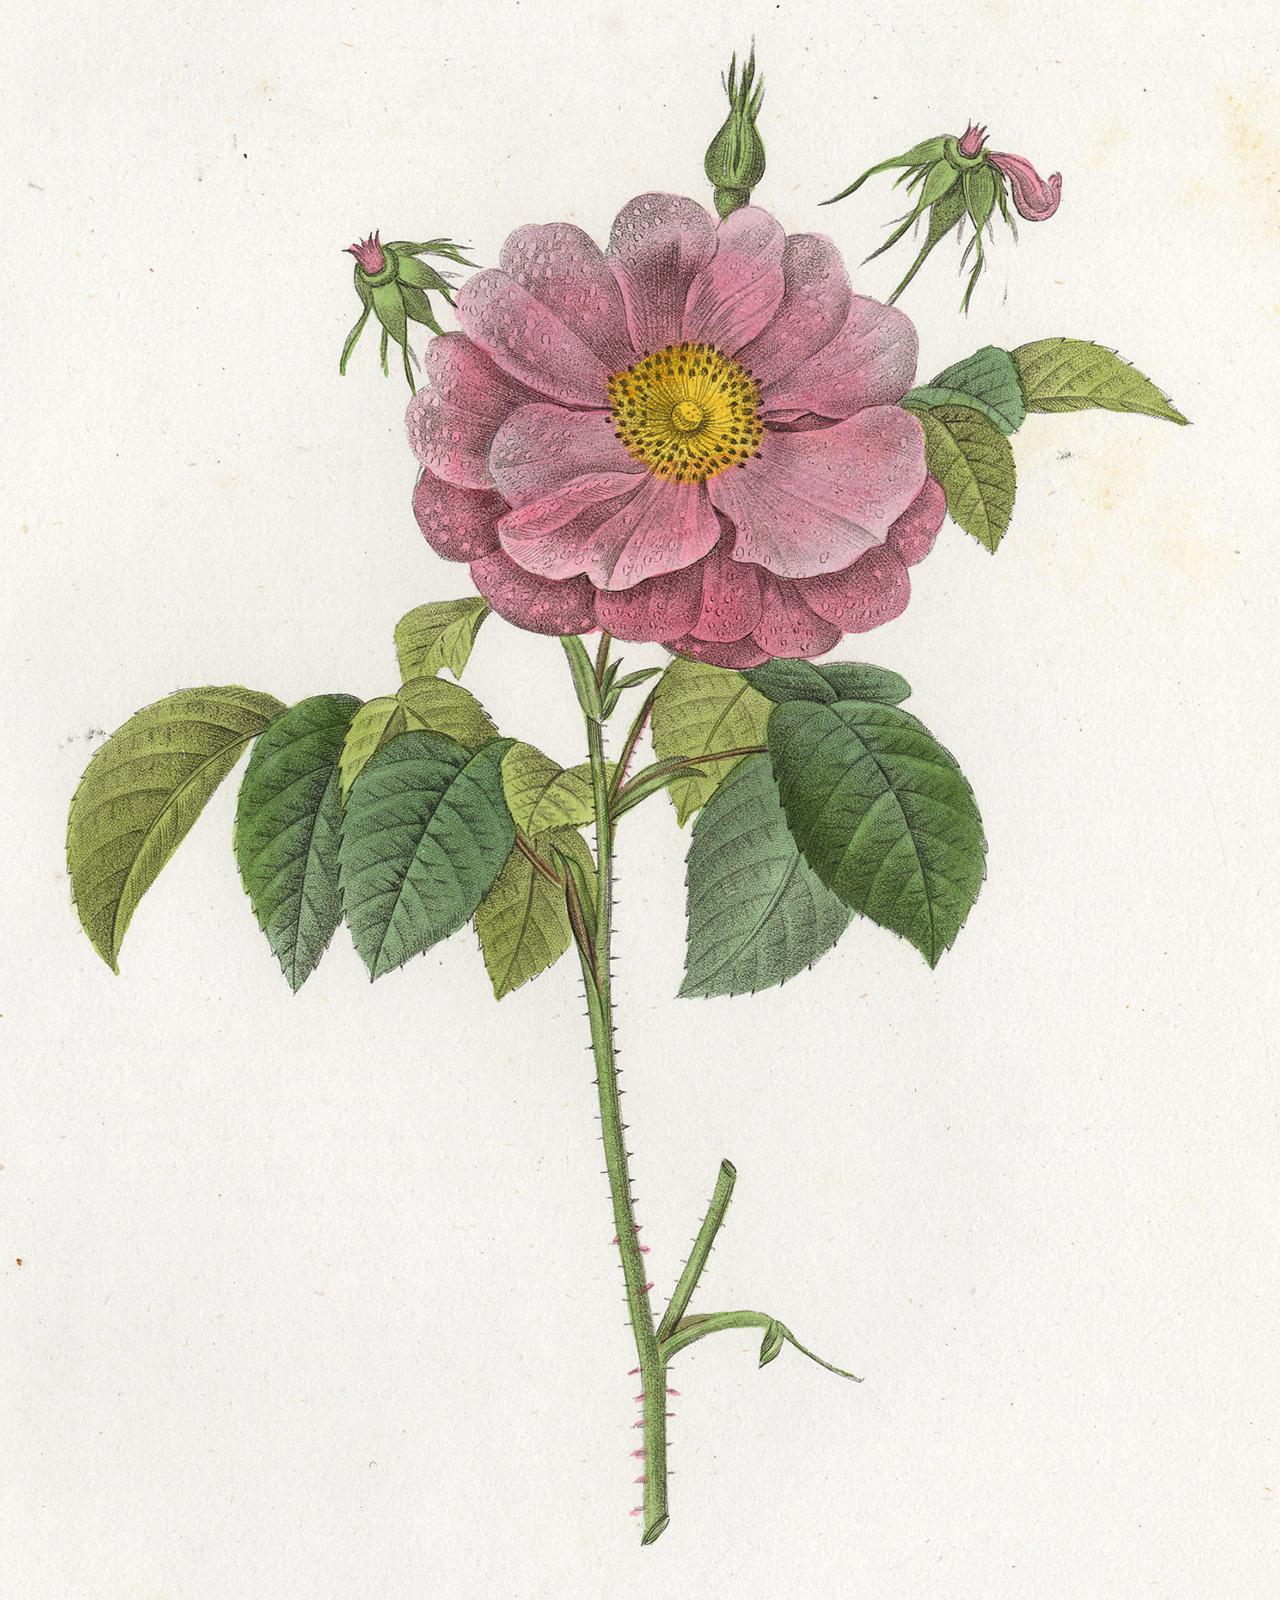 Marbled French Rose by Redoute - Handcoloured engraving - 19th century - Print by Pierre-Joseph Redouté